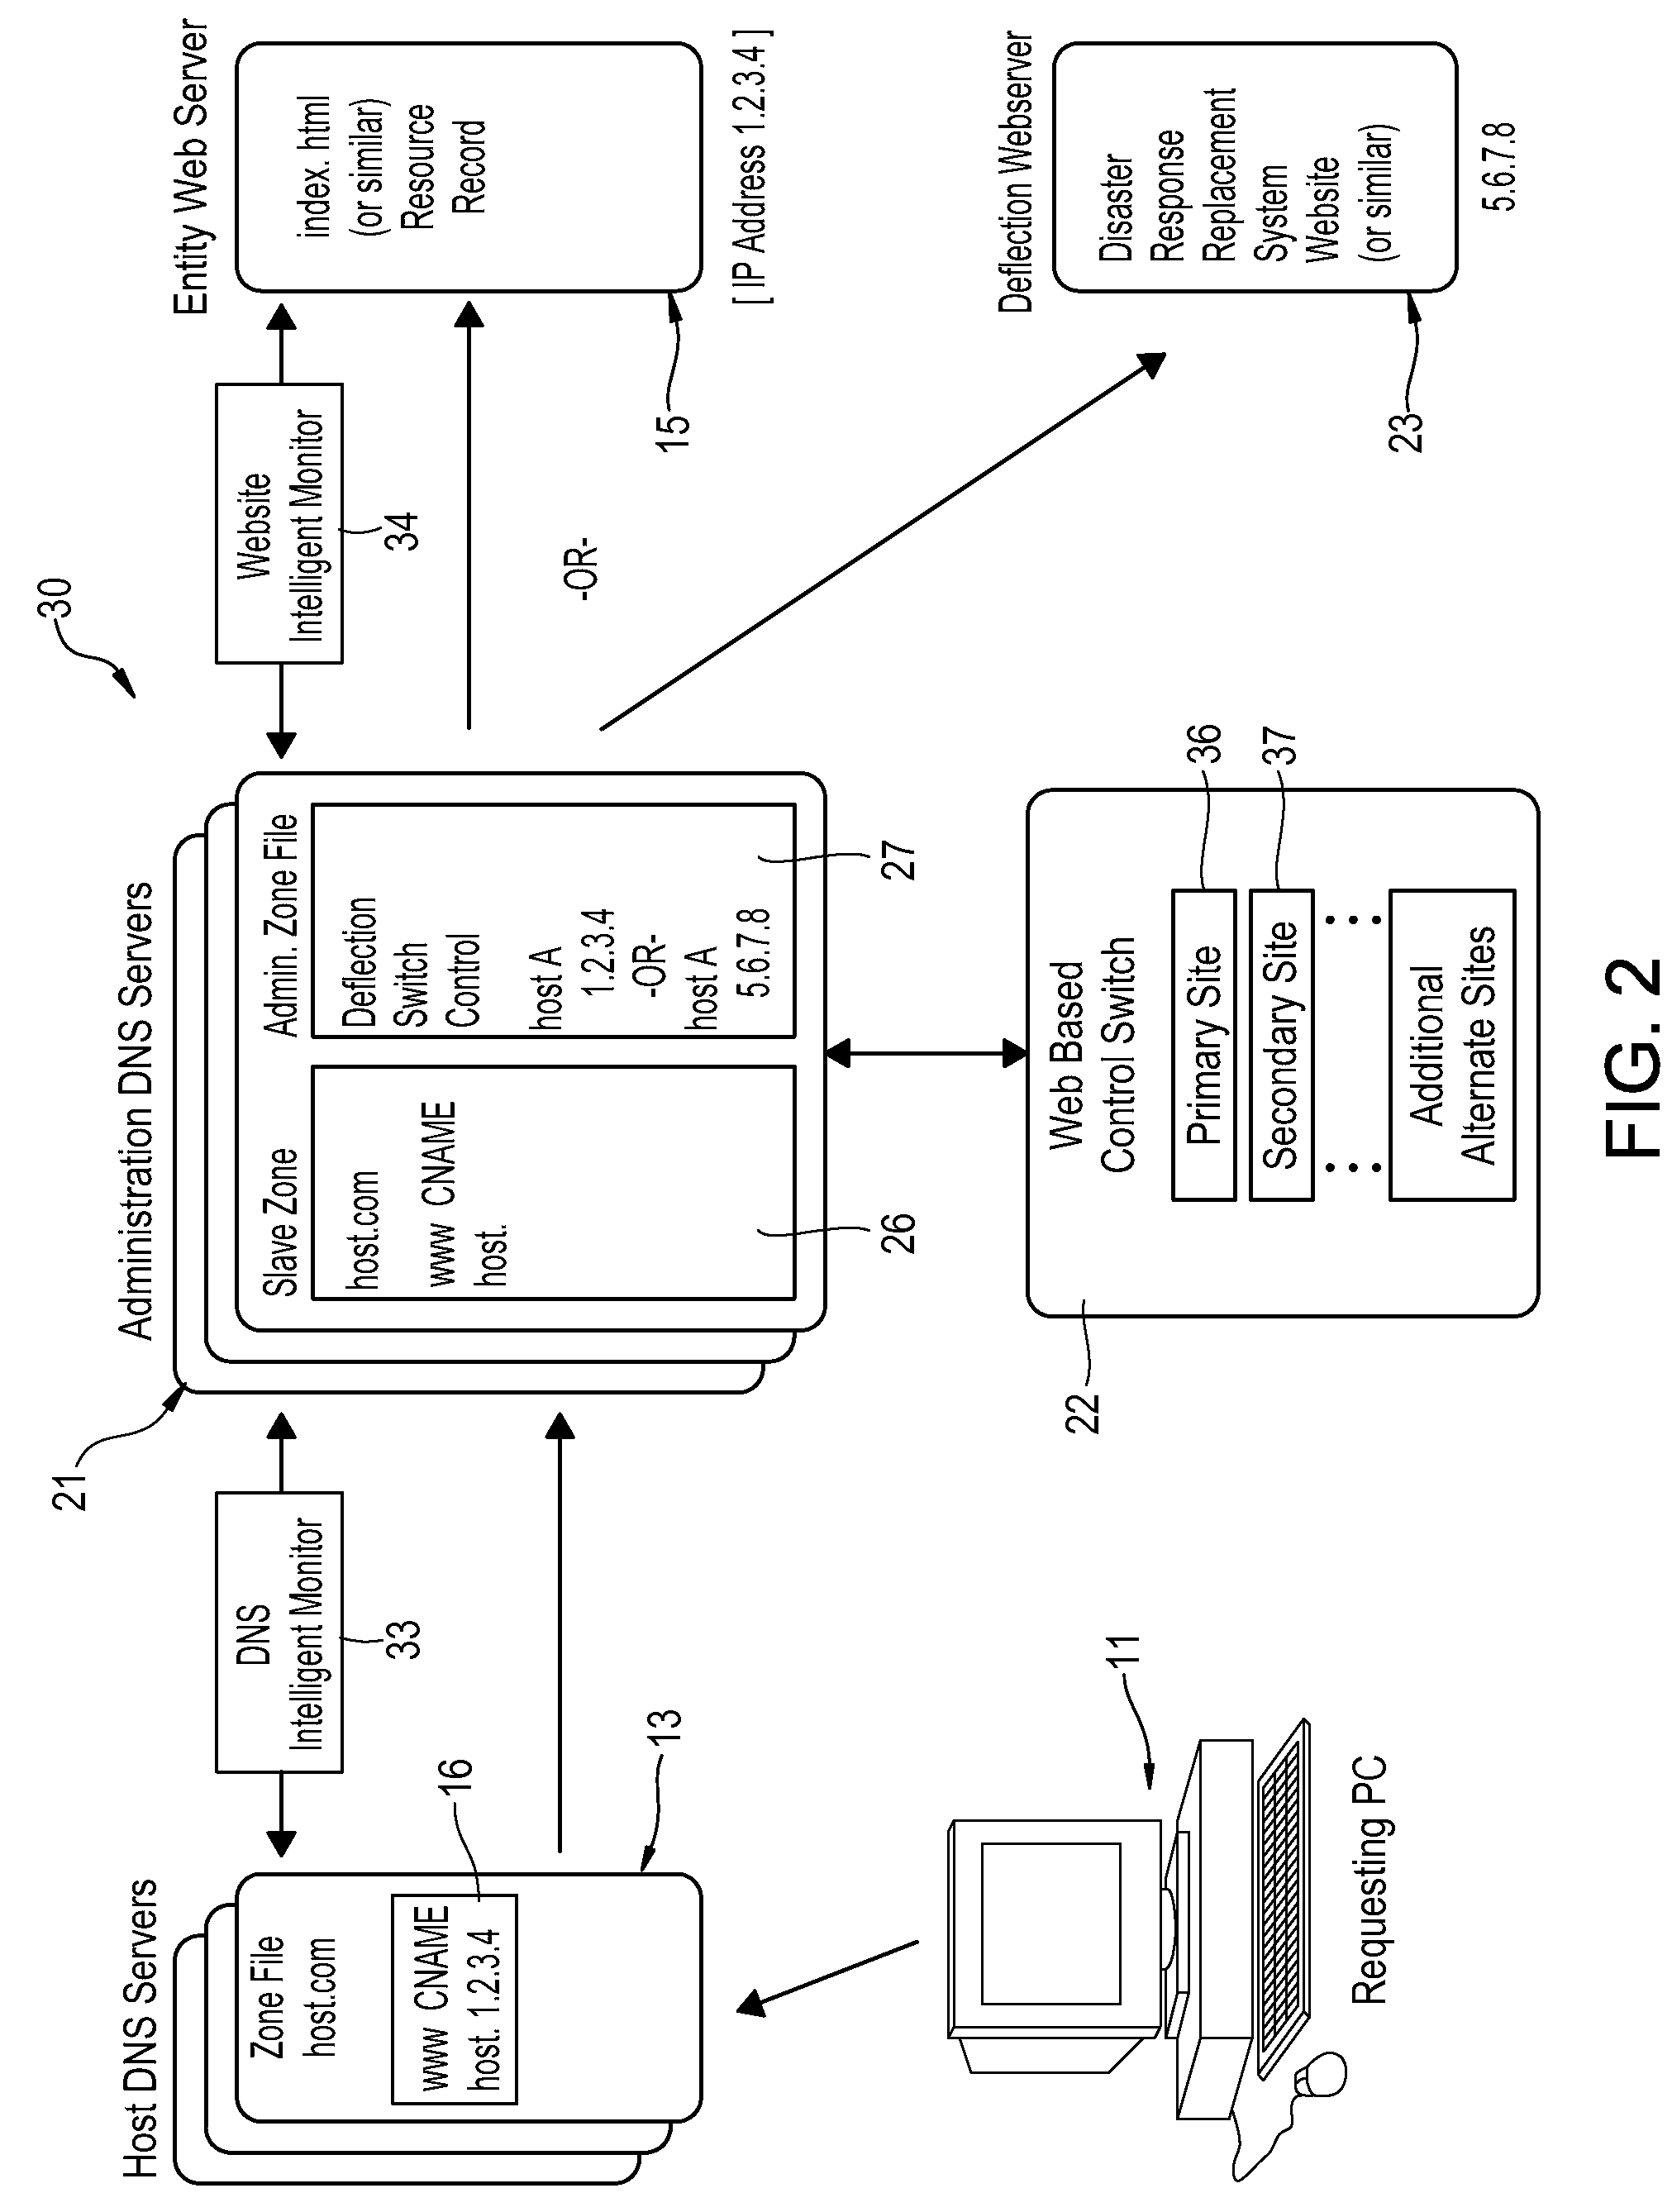 System and method for the issuance of an emergency text alert in response to the redirection of a website